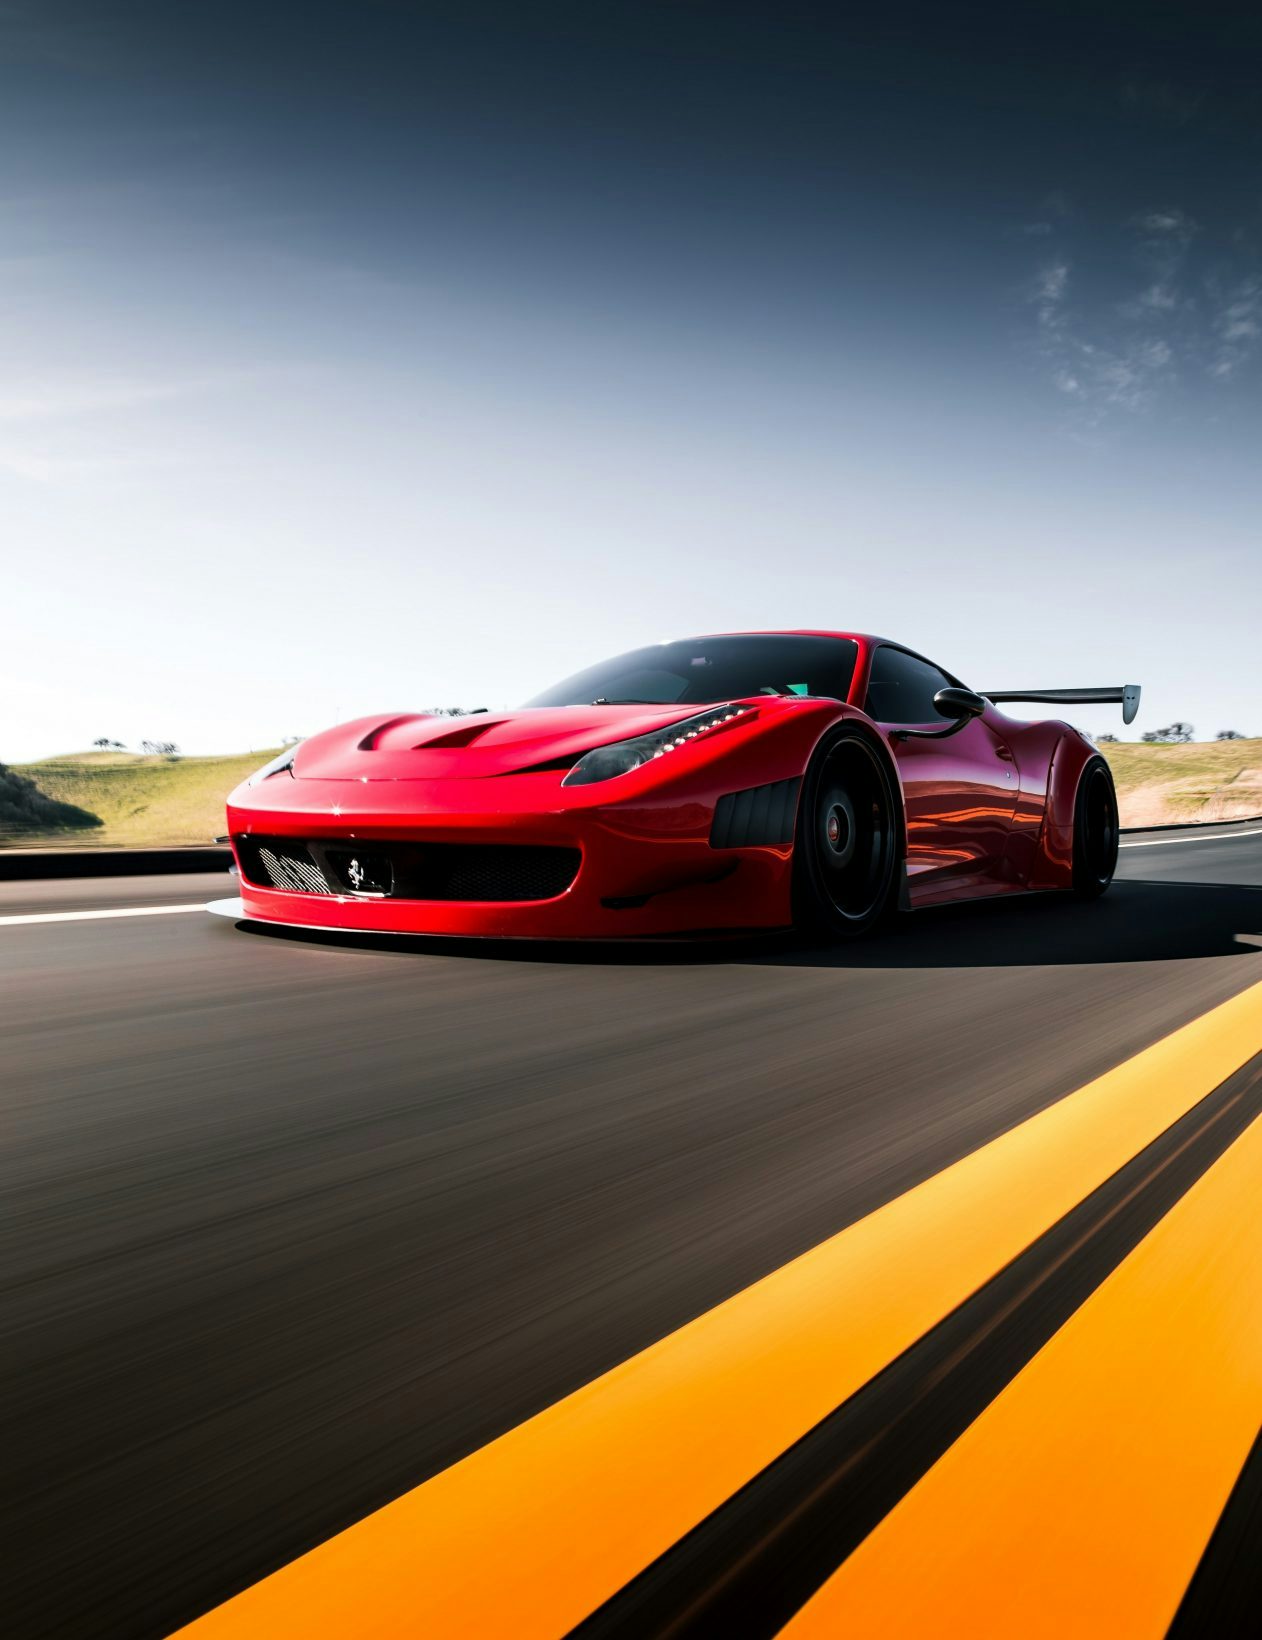 Ferrari will accept cryptocurrency payments